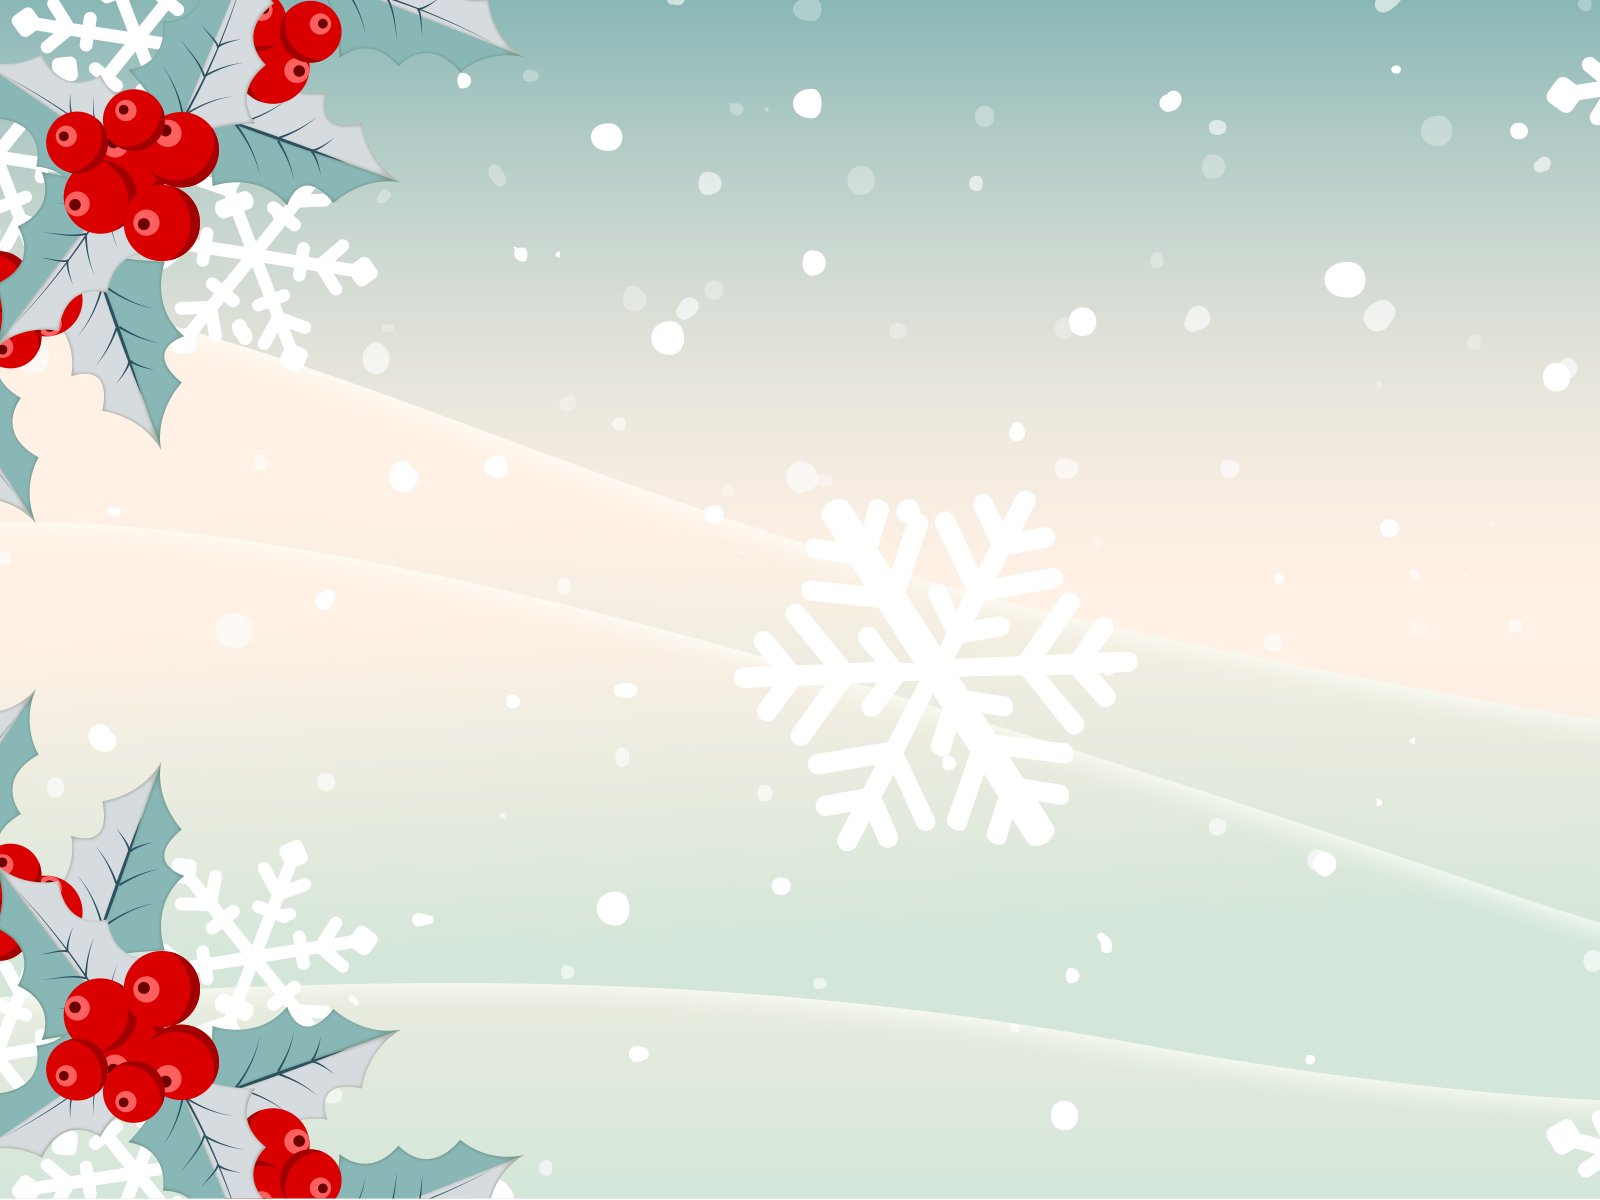 Christmas Powerpoint Templates   Free PPT Backgrounds and Templates